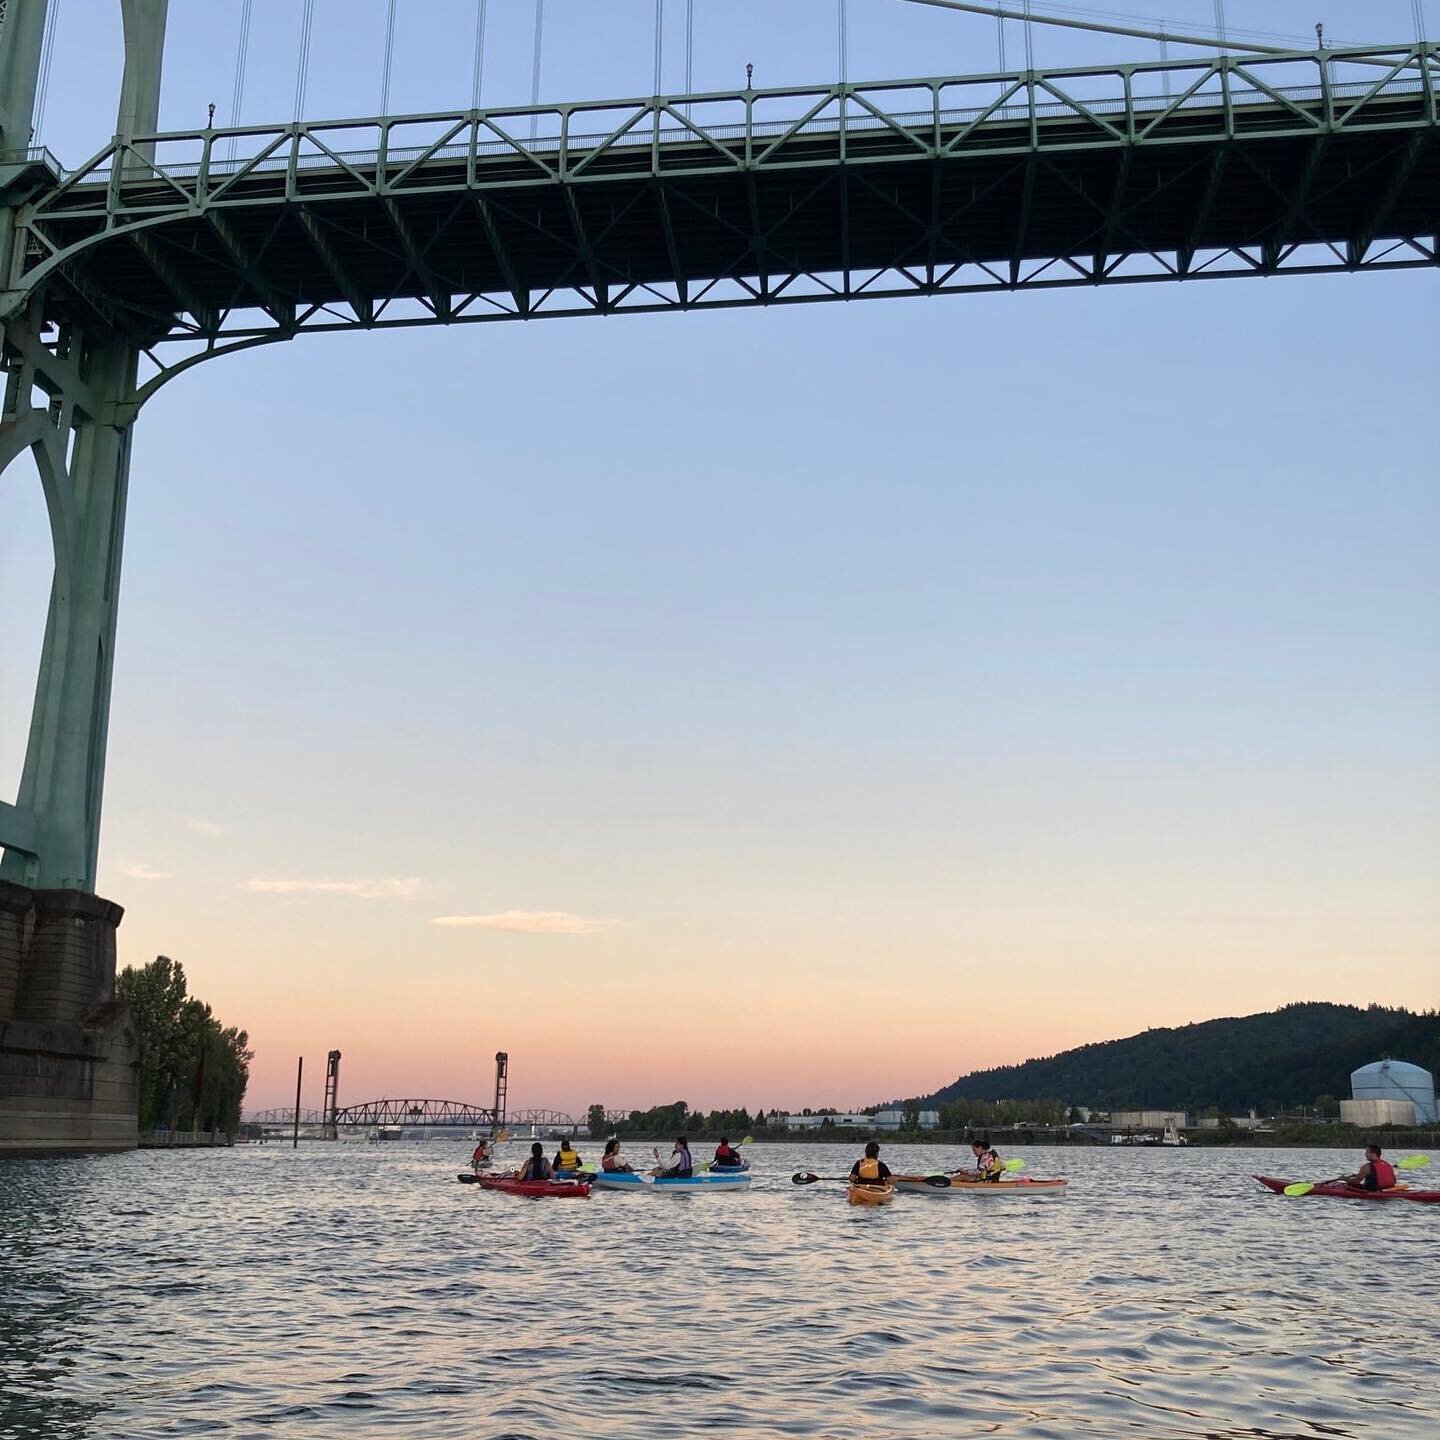 Another sunset paddle 🌅😌 Thanks to all who joined! Check out our August calendar and register for more upcoming events!